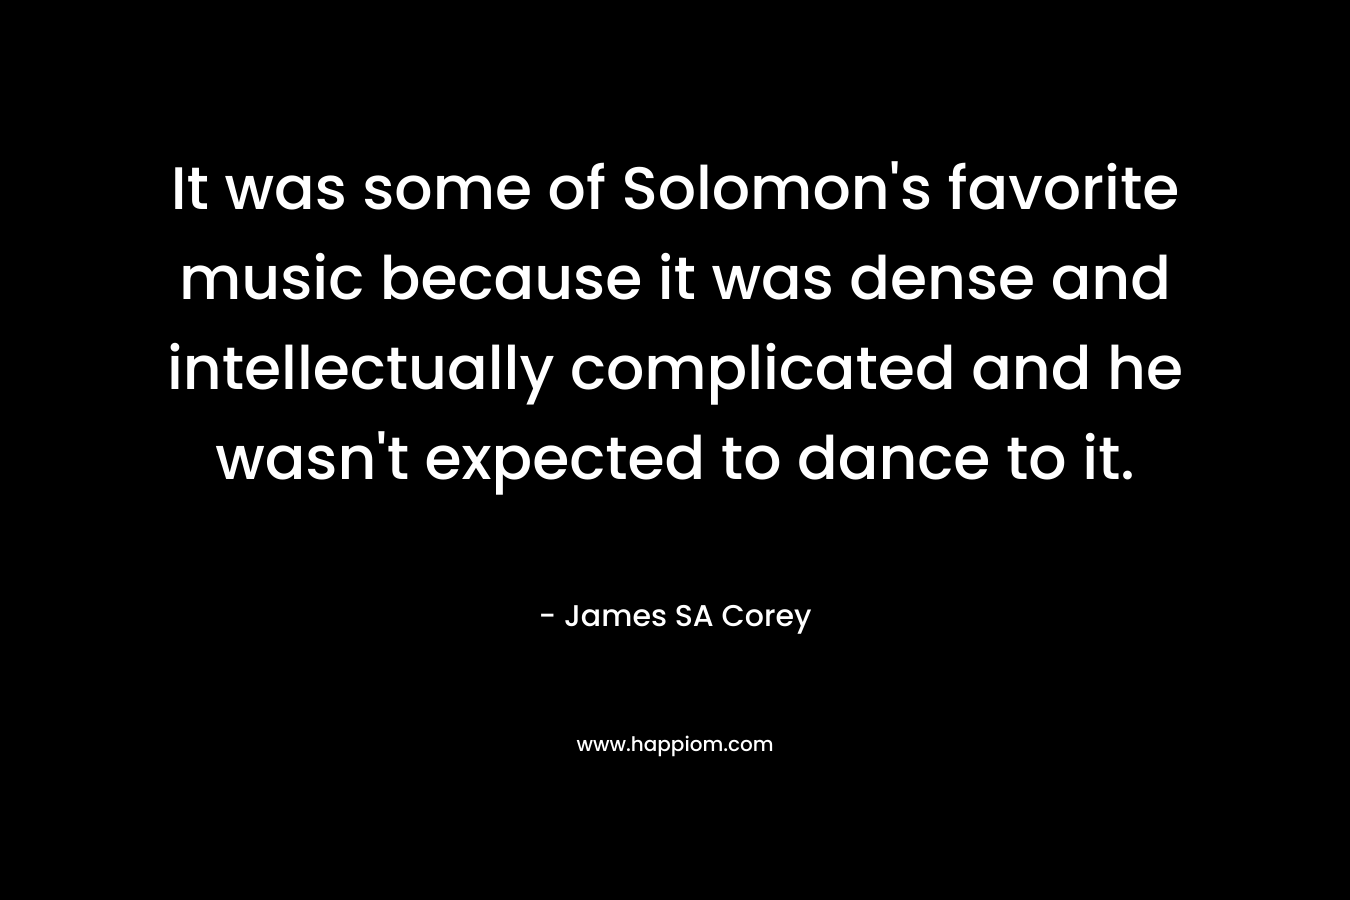 It was some of Solomon's favorite music because it was dense and intellectually complicated and he wasn't expected to dance to it.